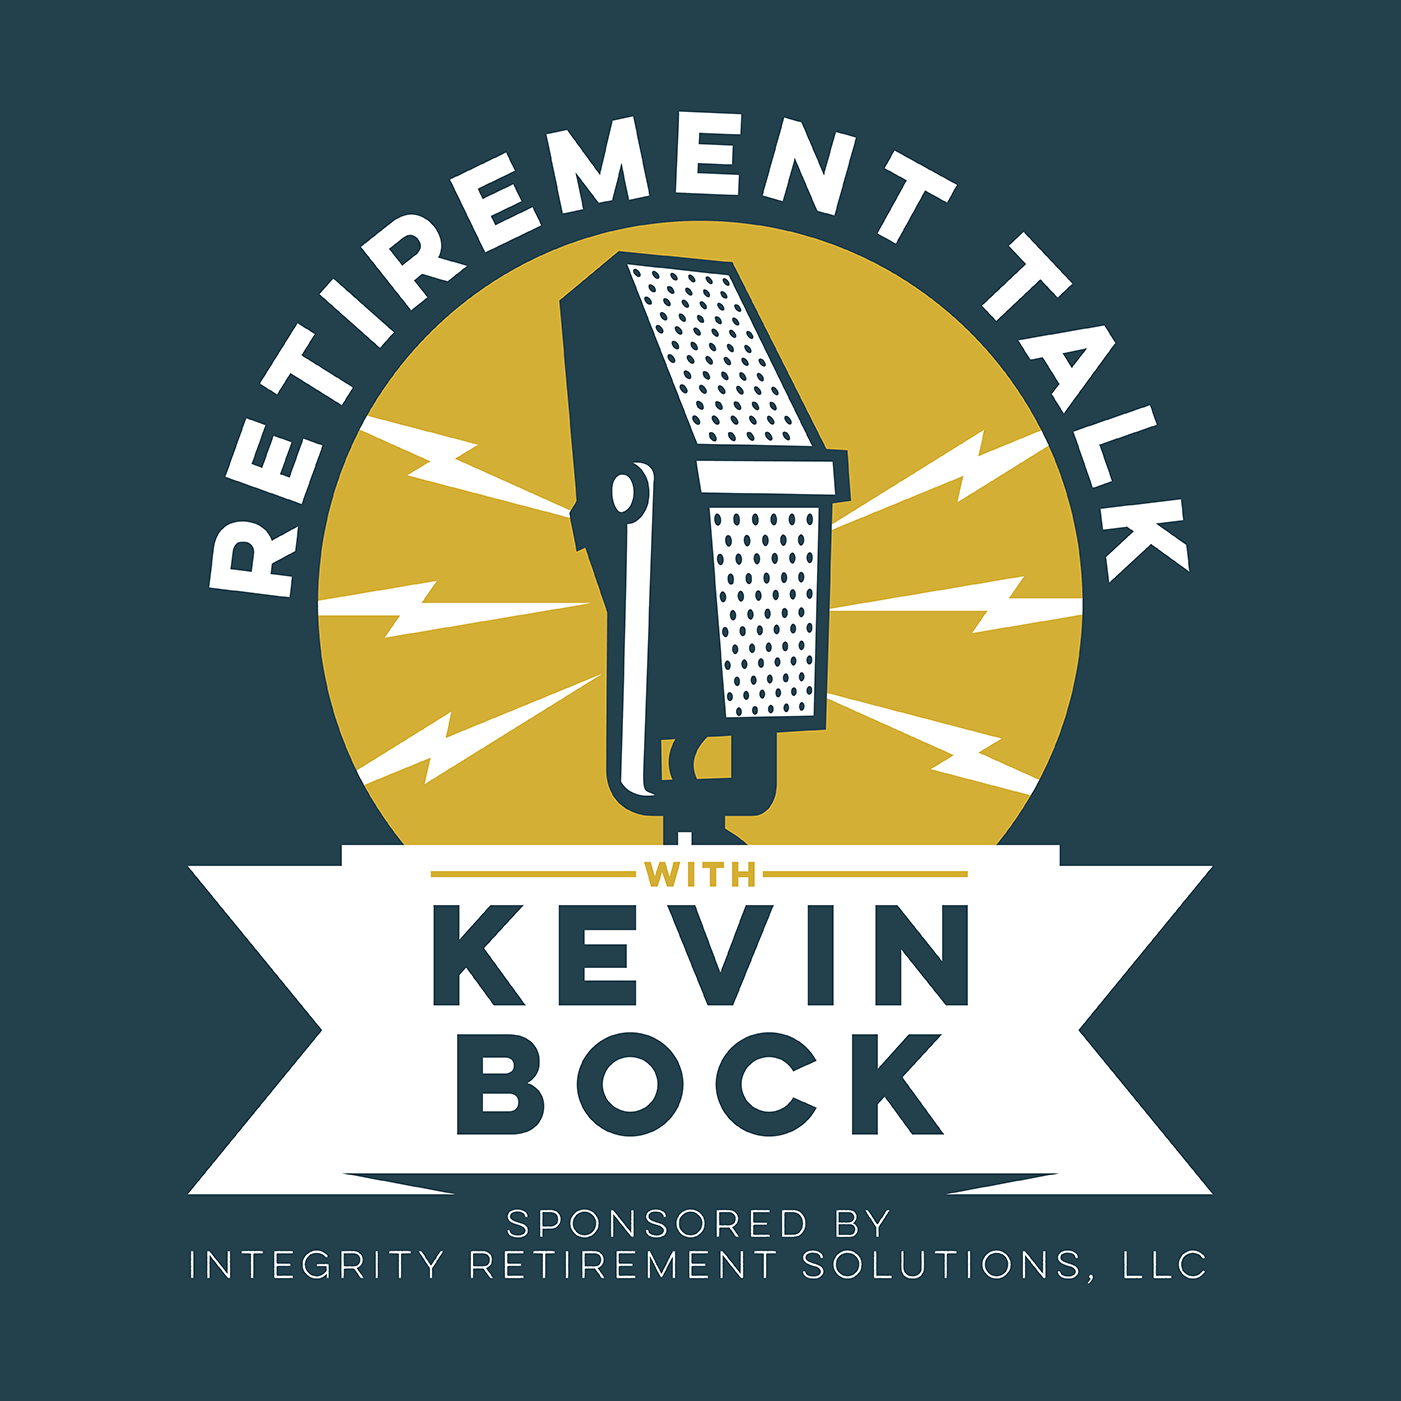 Social Security's Uncertain Future and the Golden Bachelor's Retirement Story